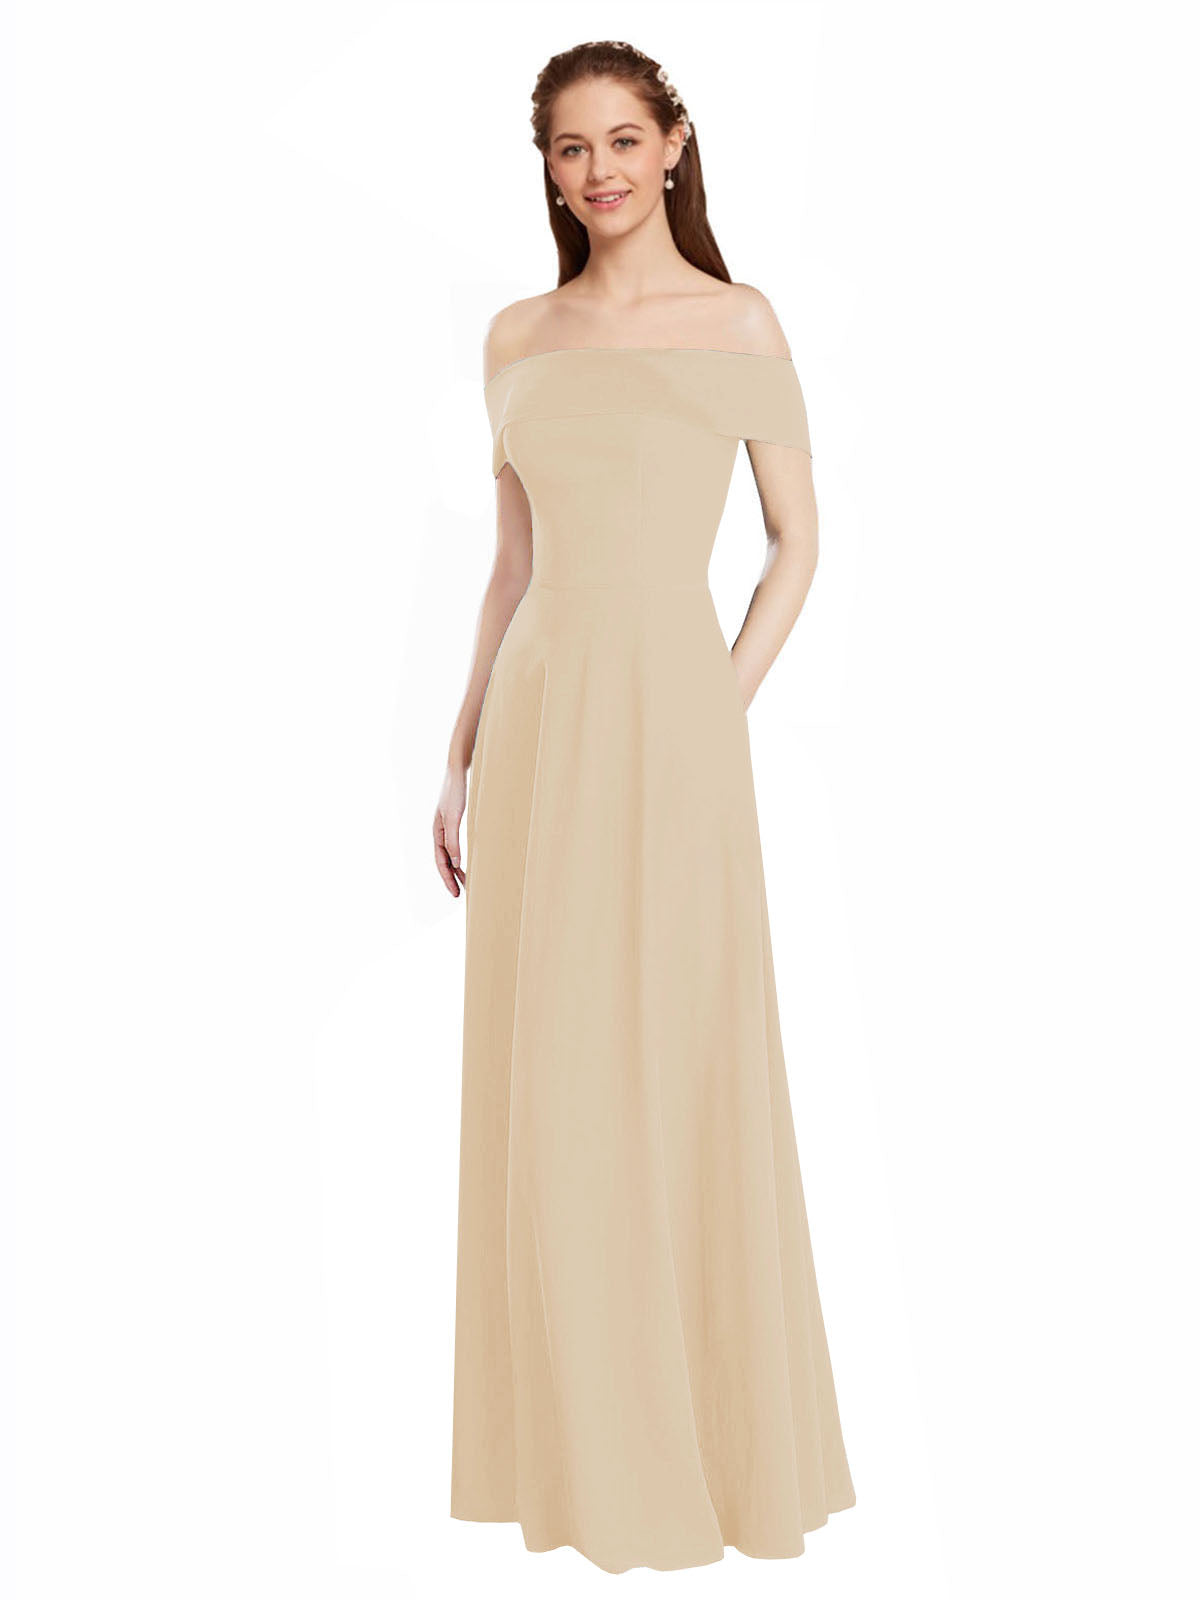 Champagne A-Line Off the Shoulder Cap Sleeves Long Bridesmaid Dress Lina